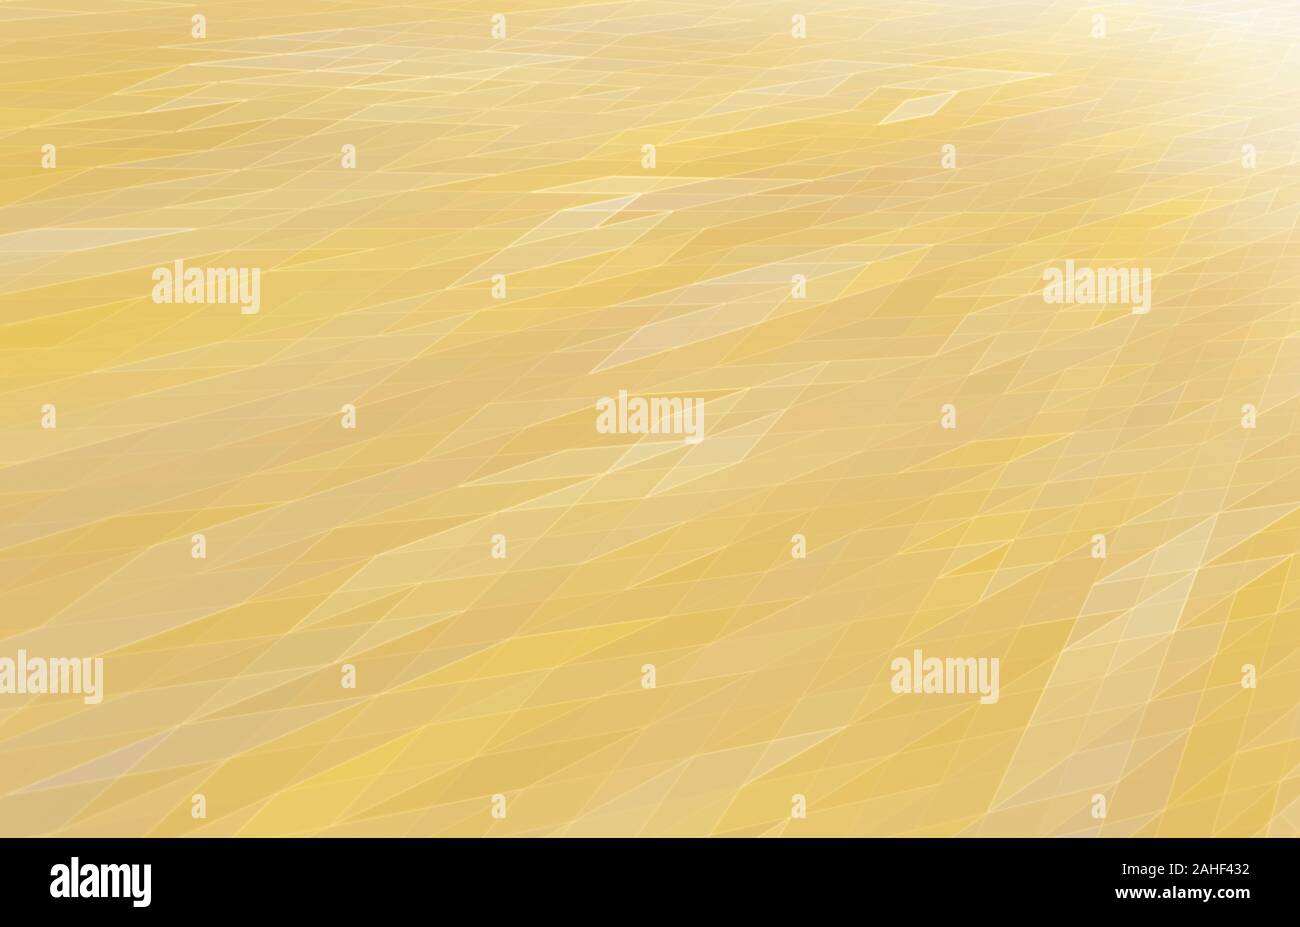 Abstract yellow triangular shape background with tilted, diminishing perspective. High resolution full frame triangle geometric background. Copy space Stock Photo